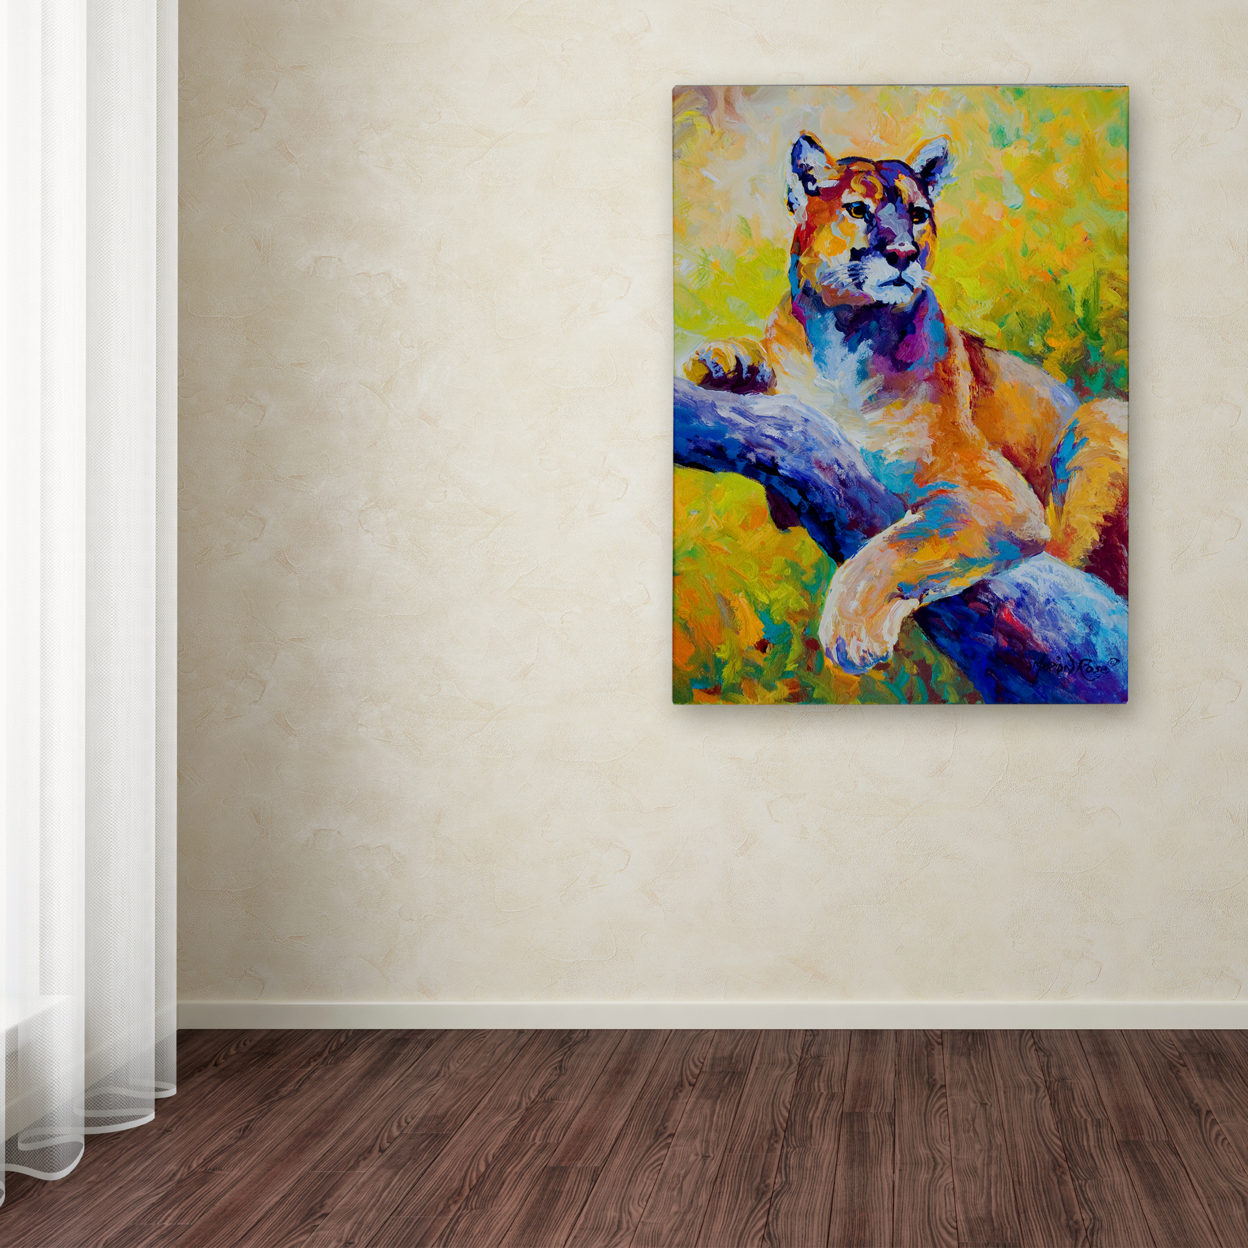 Marion Rose 'Cub' Ready To Hang Canvas Art 35 X 47 Inches Made In USA